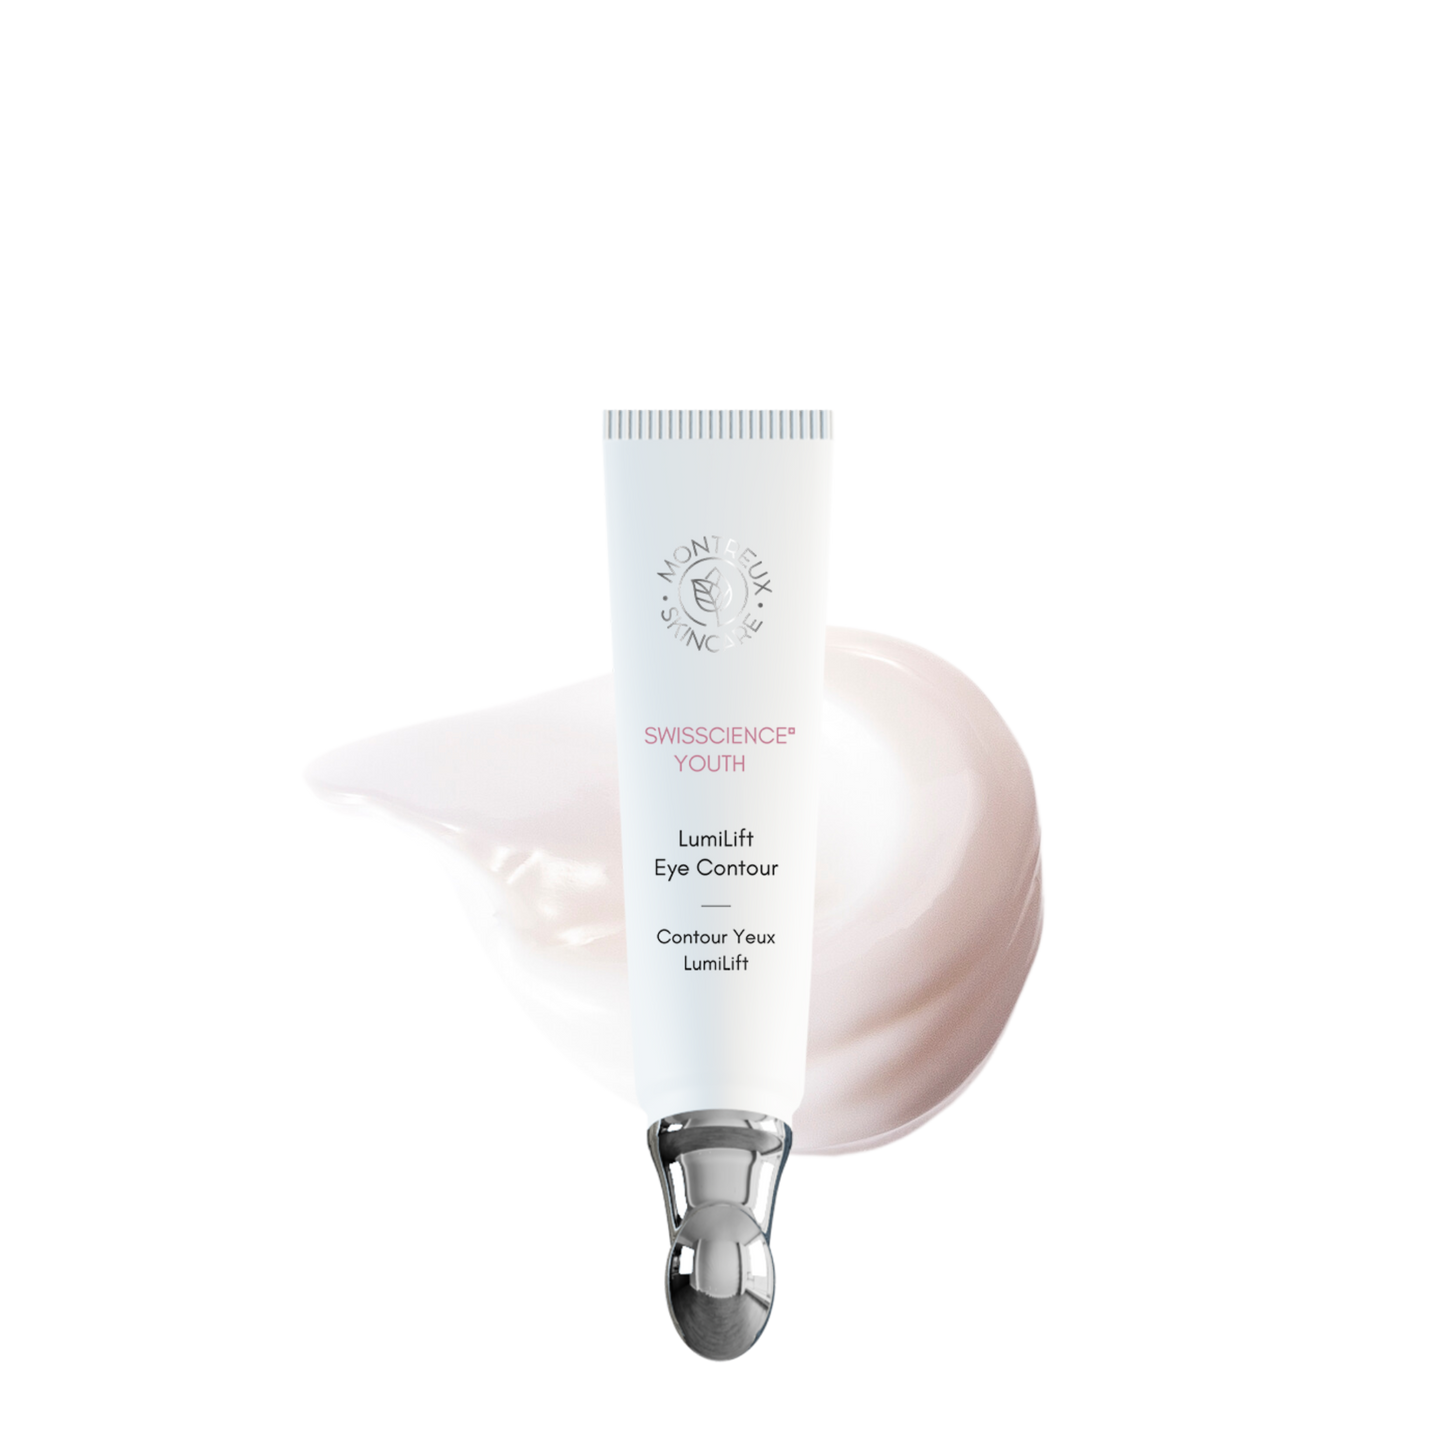 Product picture of the LumiLift Eye Contour of the brand Montreux Skincare created with Narcissus flower with a drop of its light and creamy texture behind